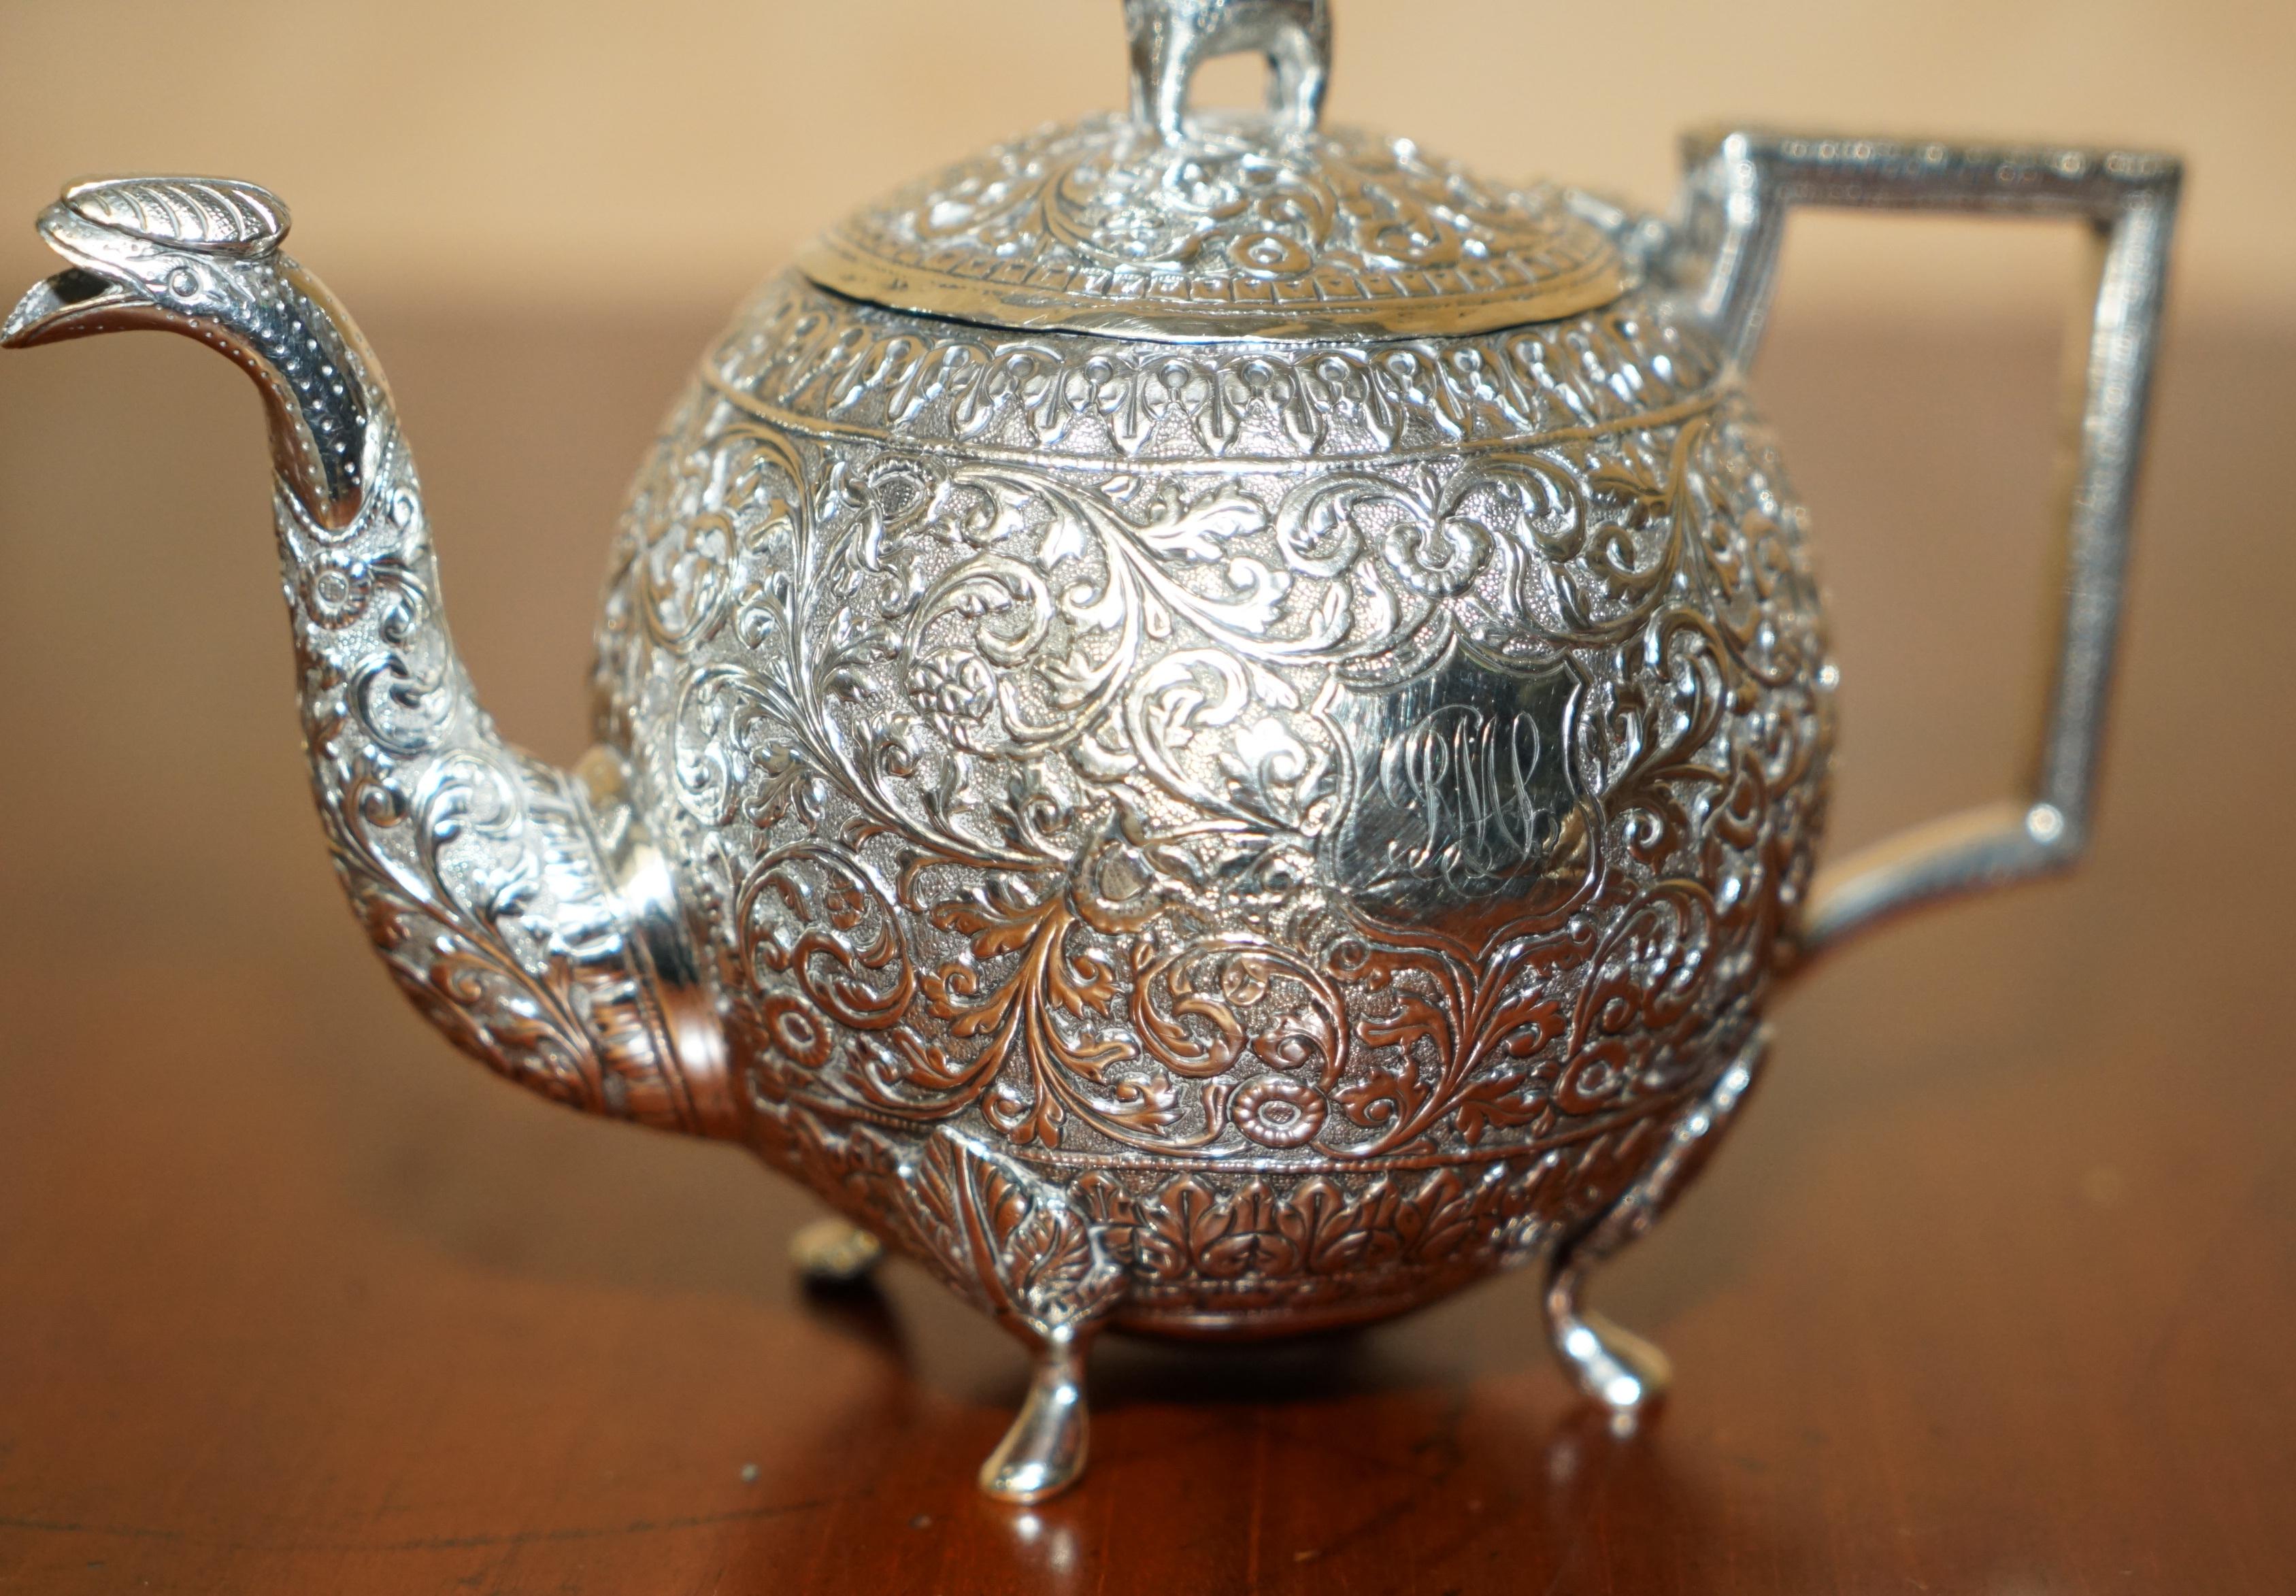 ANTIQUE INDIAN ELEPHANT COLONIAL SOLiD SILBER TEA SERVICE OOMERSI MAWJI & SONS (Indisch) im Angebot